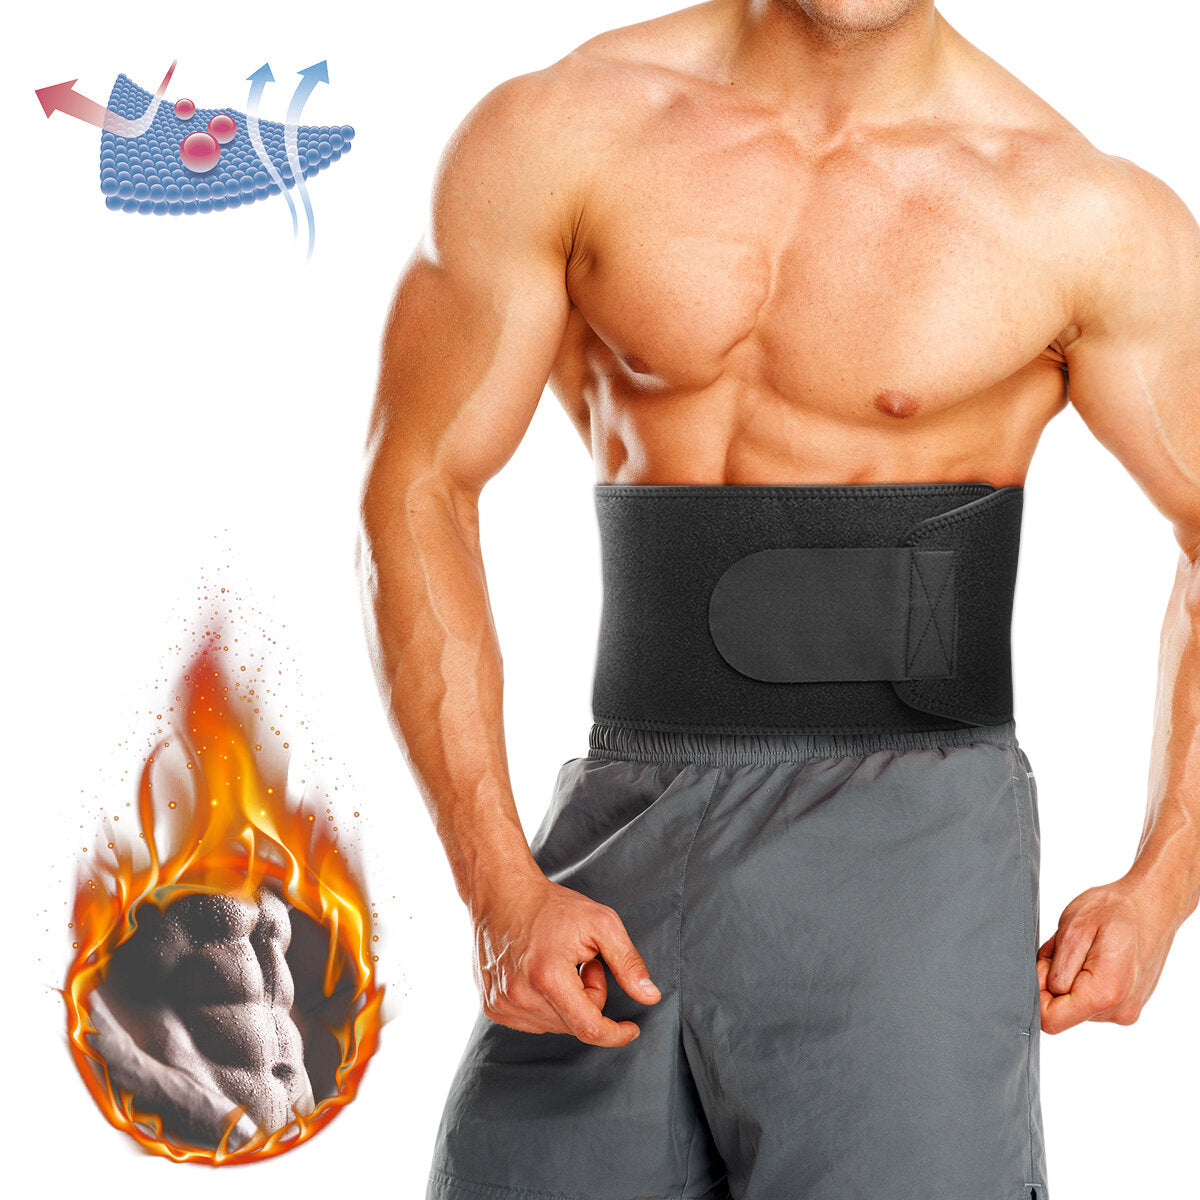 BIKIGHT Adjustable Waist Support Fitness Belt Sport Protection Back Absorb Sweat Fitness Protective Gear